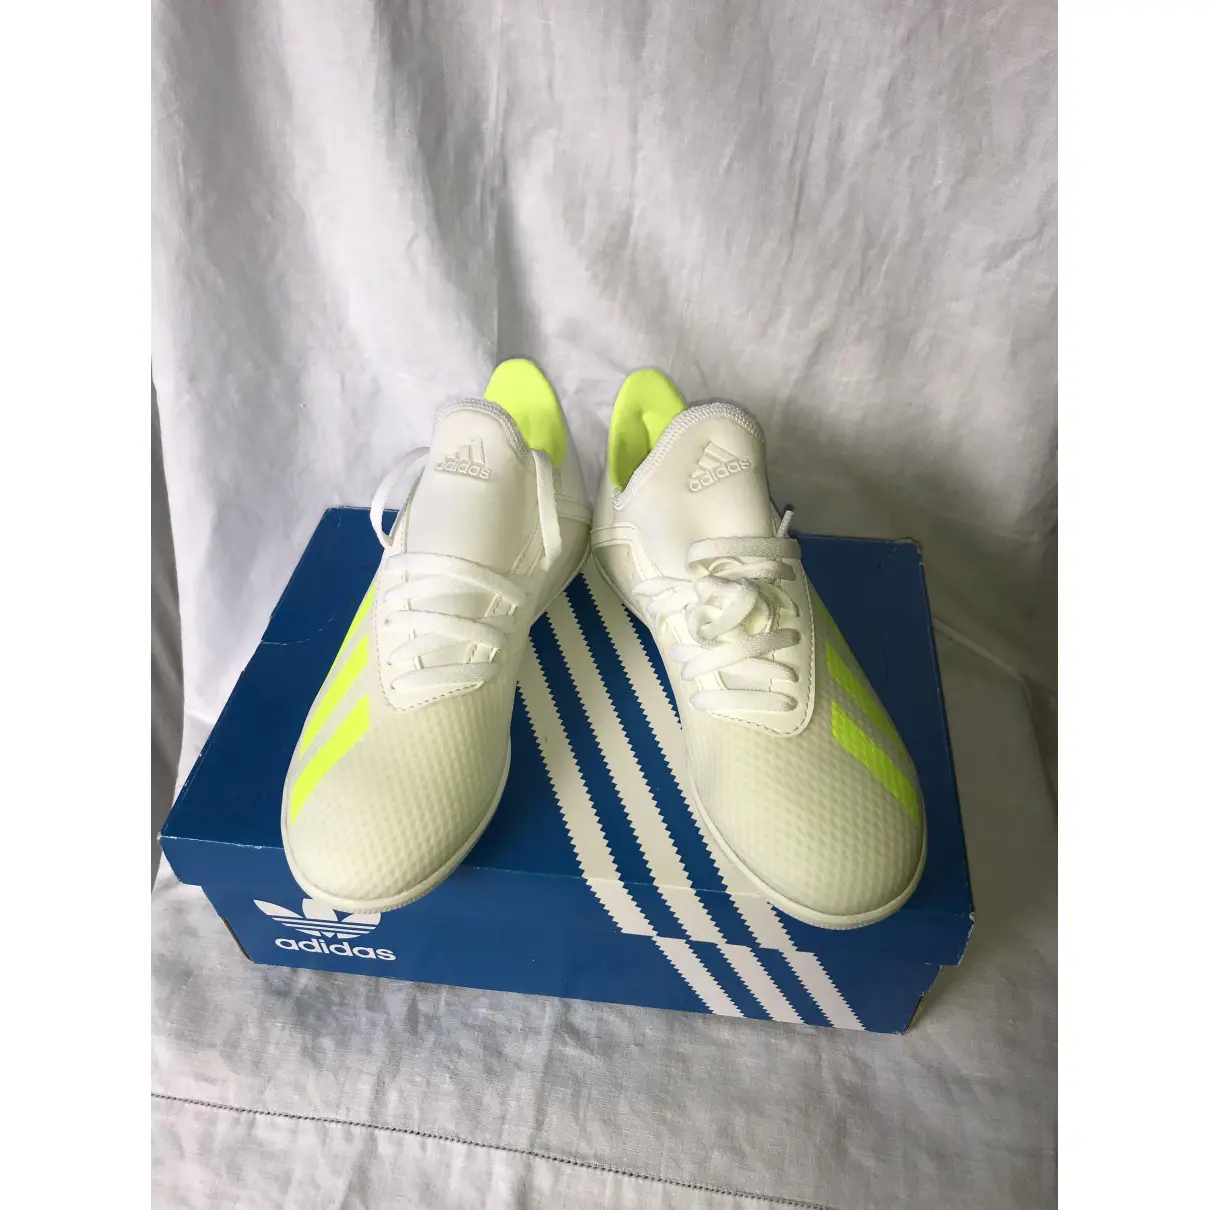 Buy Adidas Leather trainers online